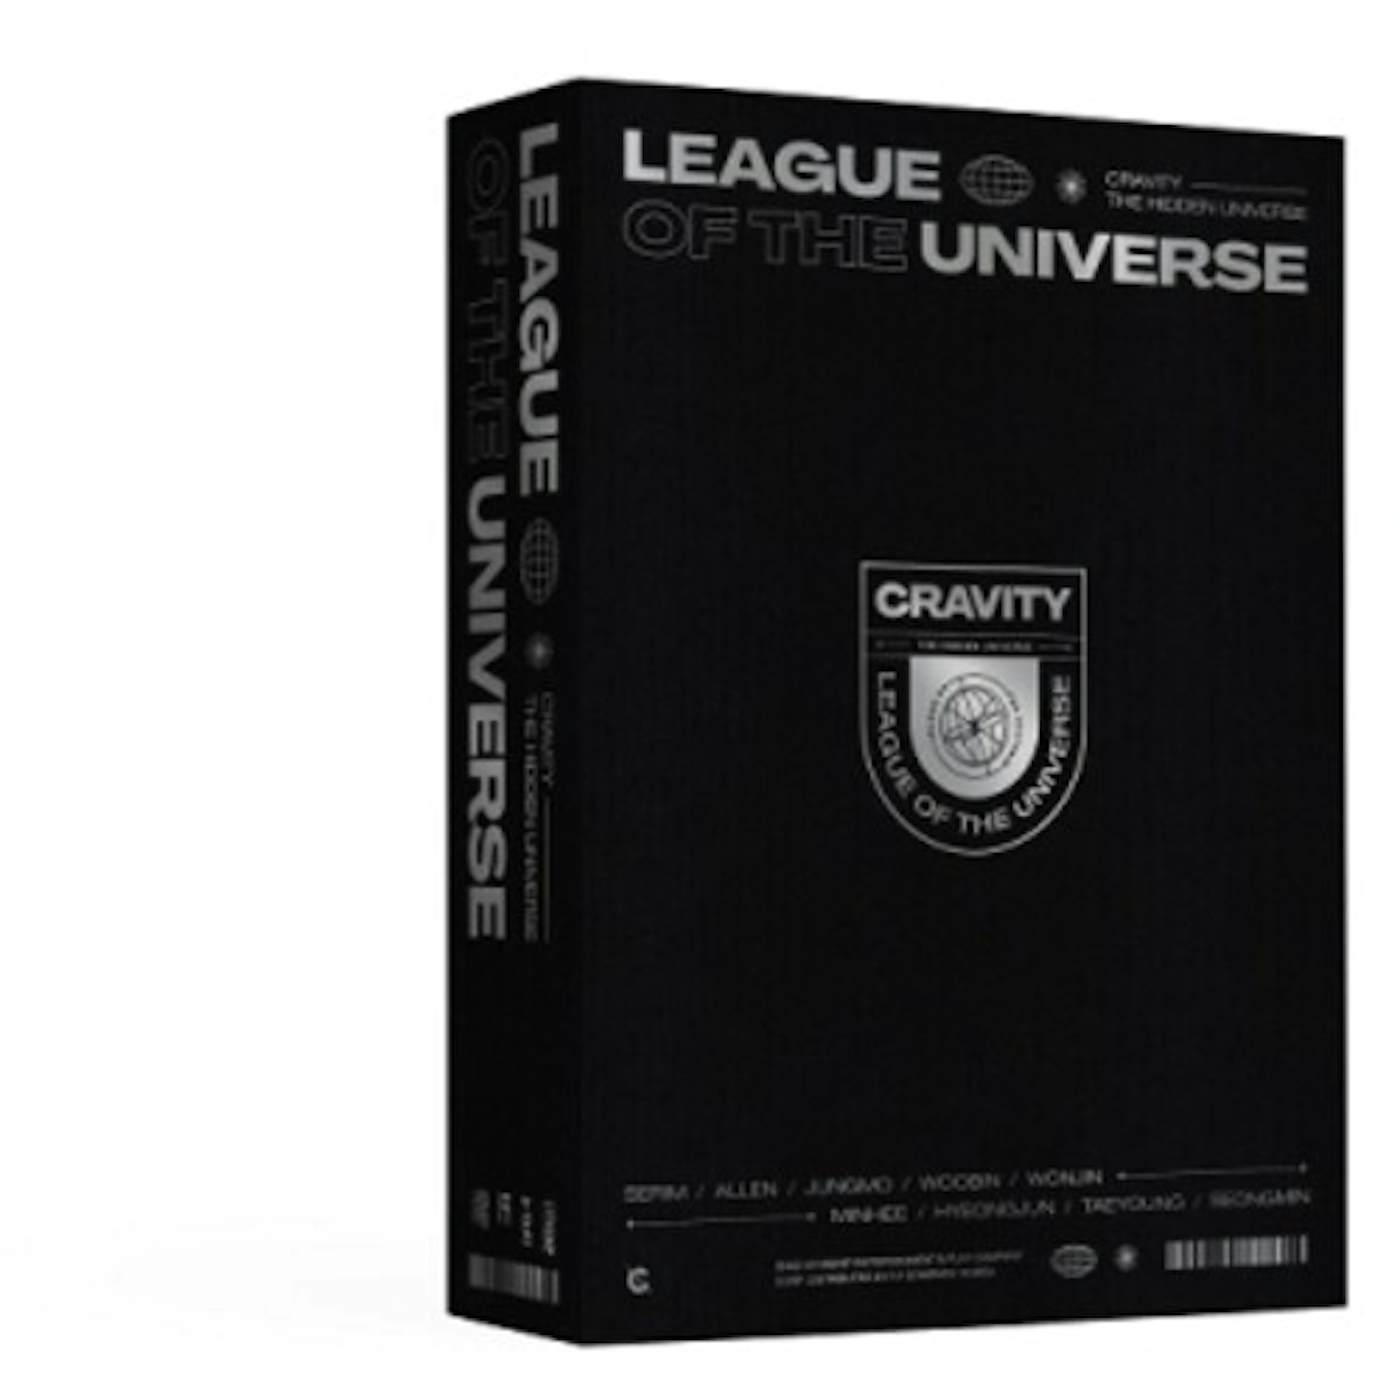 CRAVITY LEAGUE OF THE UNIVERSE DVD